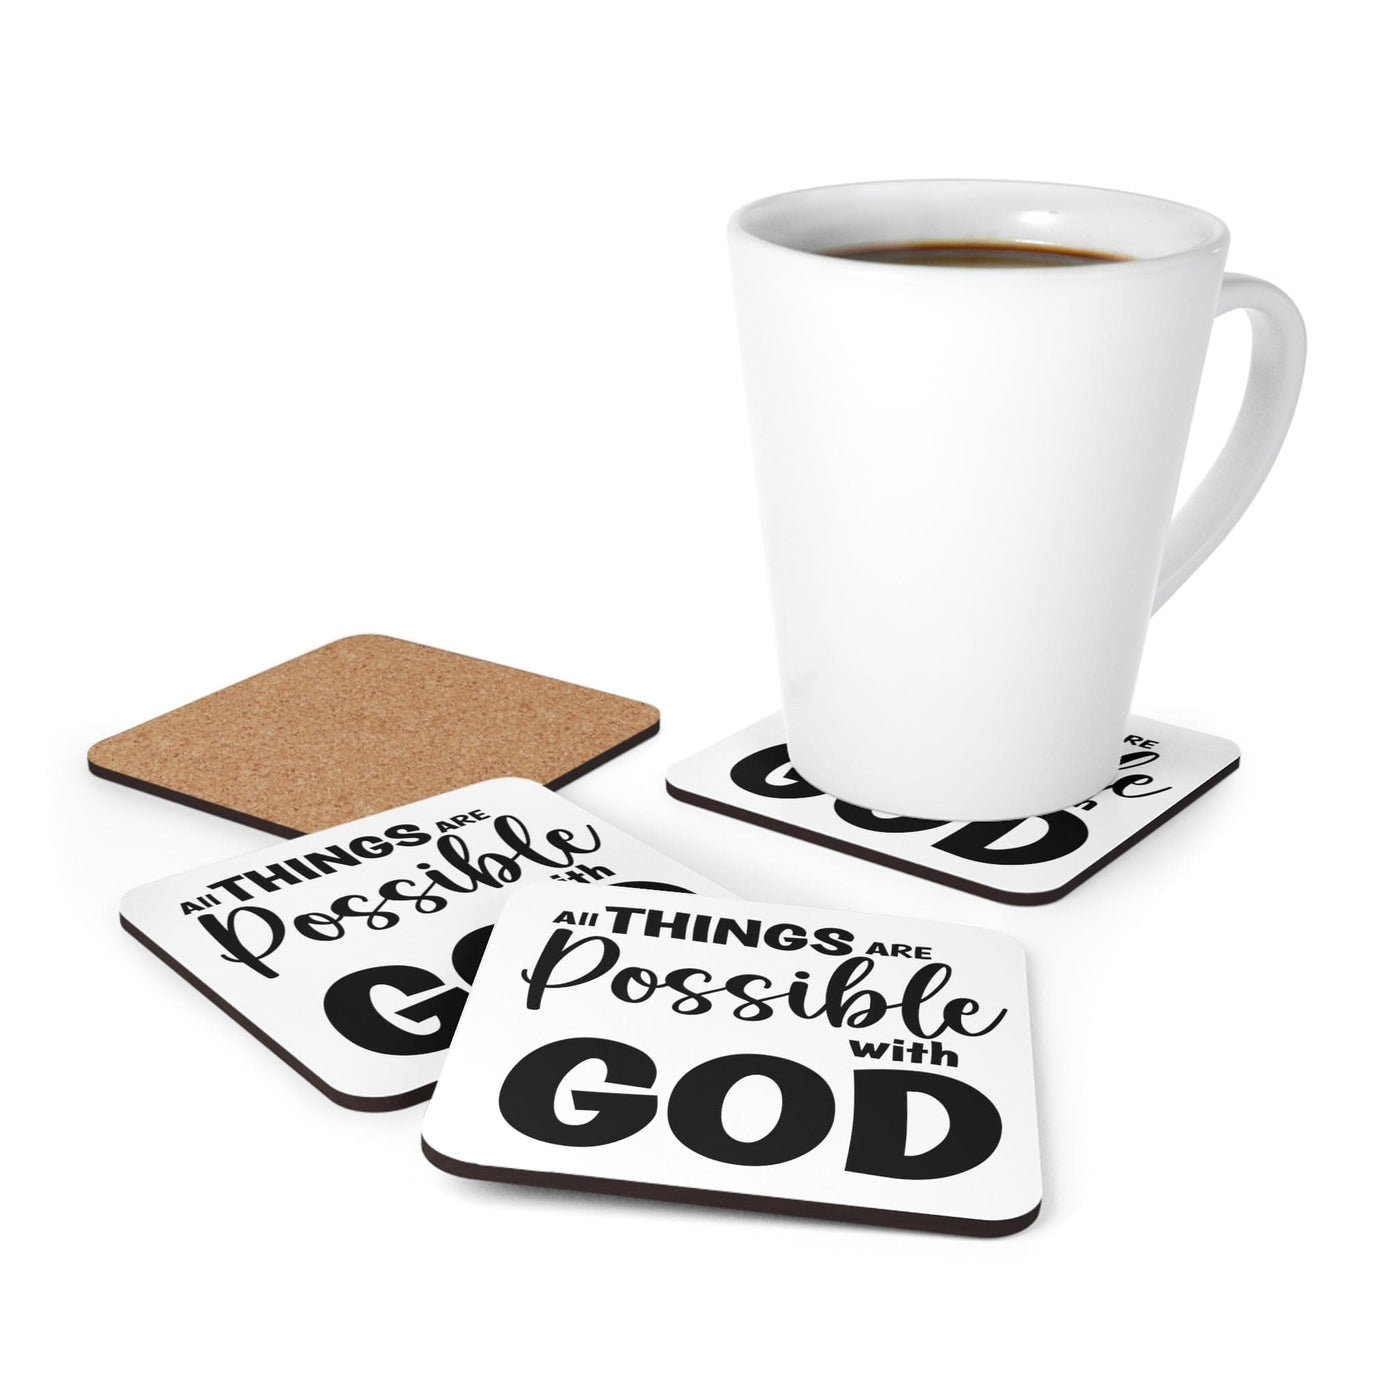 Handcrafted Square Coaster Set Of 4 For Drinks And Cups All Things Are Possible